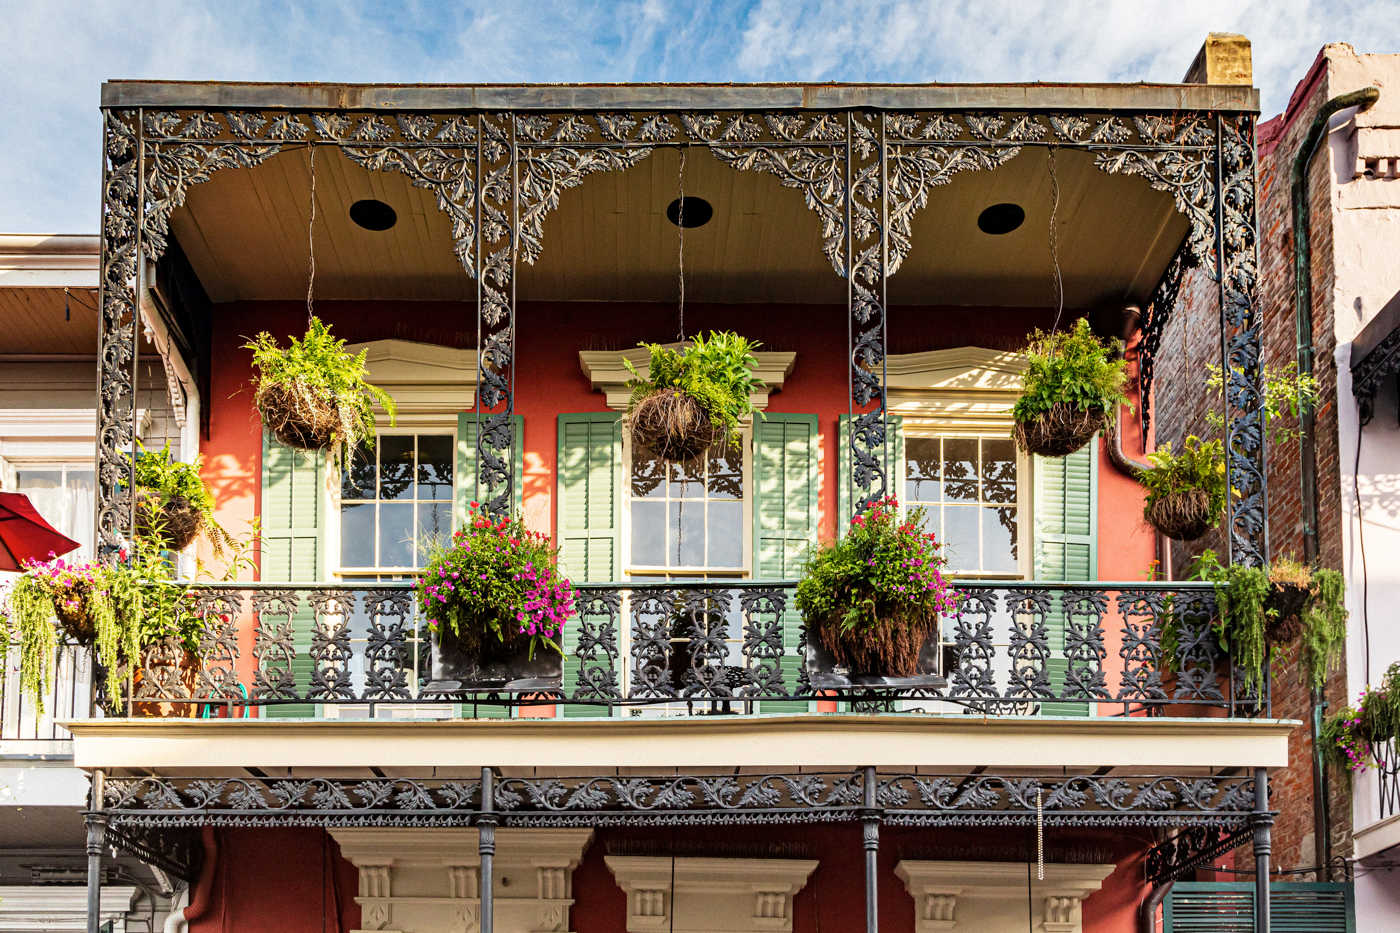 25 THINGS TO DO IN LOUISIANA EVERYONE WILL LOVE